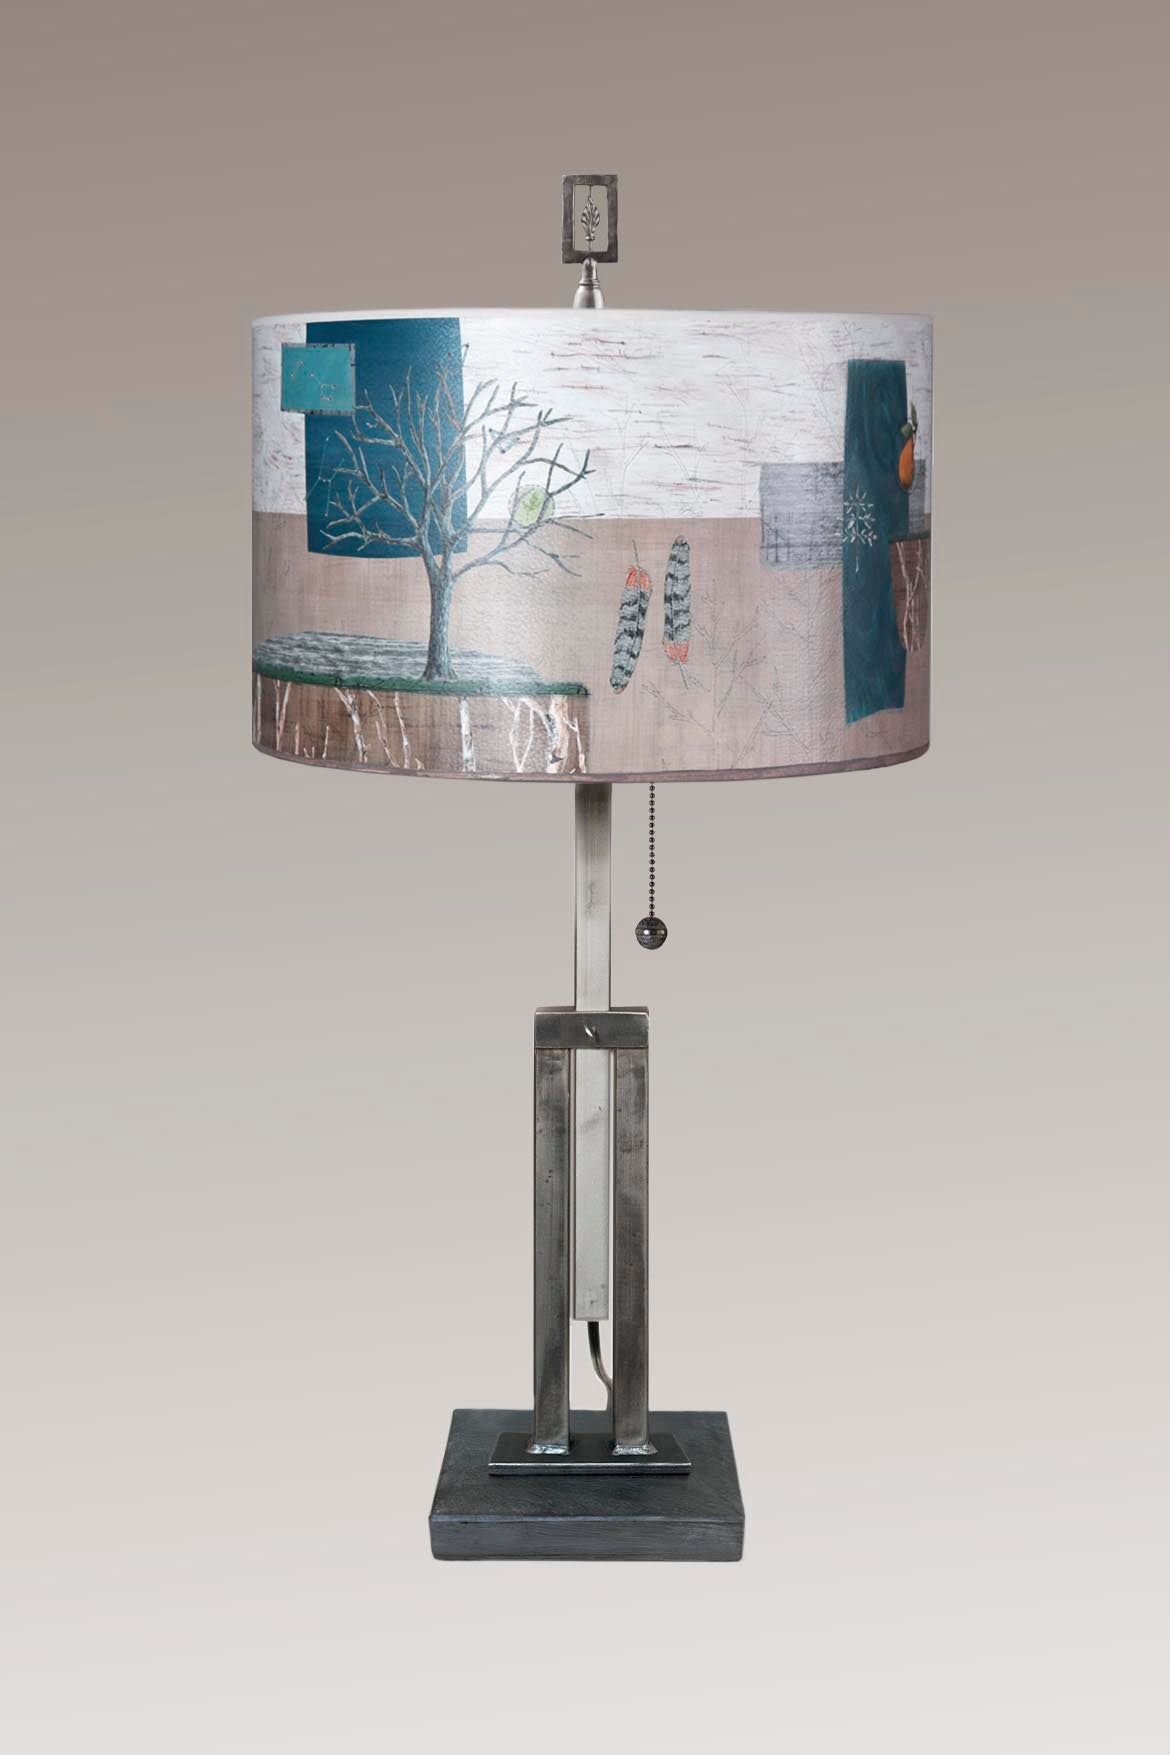 Janna Ugone & Co Table Lamp Adjustable-Height Steel Table Lamp with Large Drum Shade in Wander in Drift